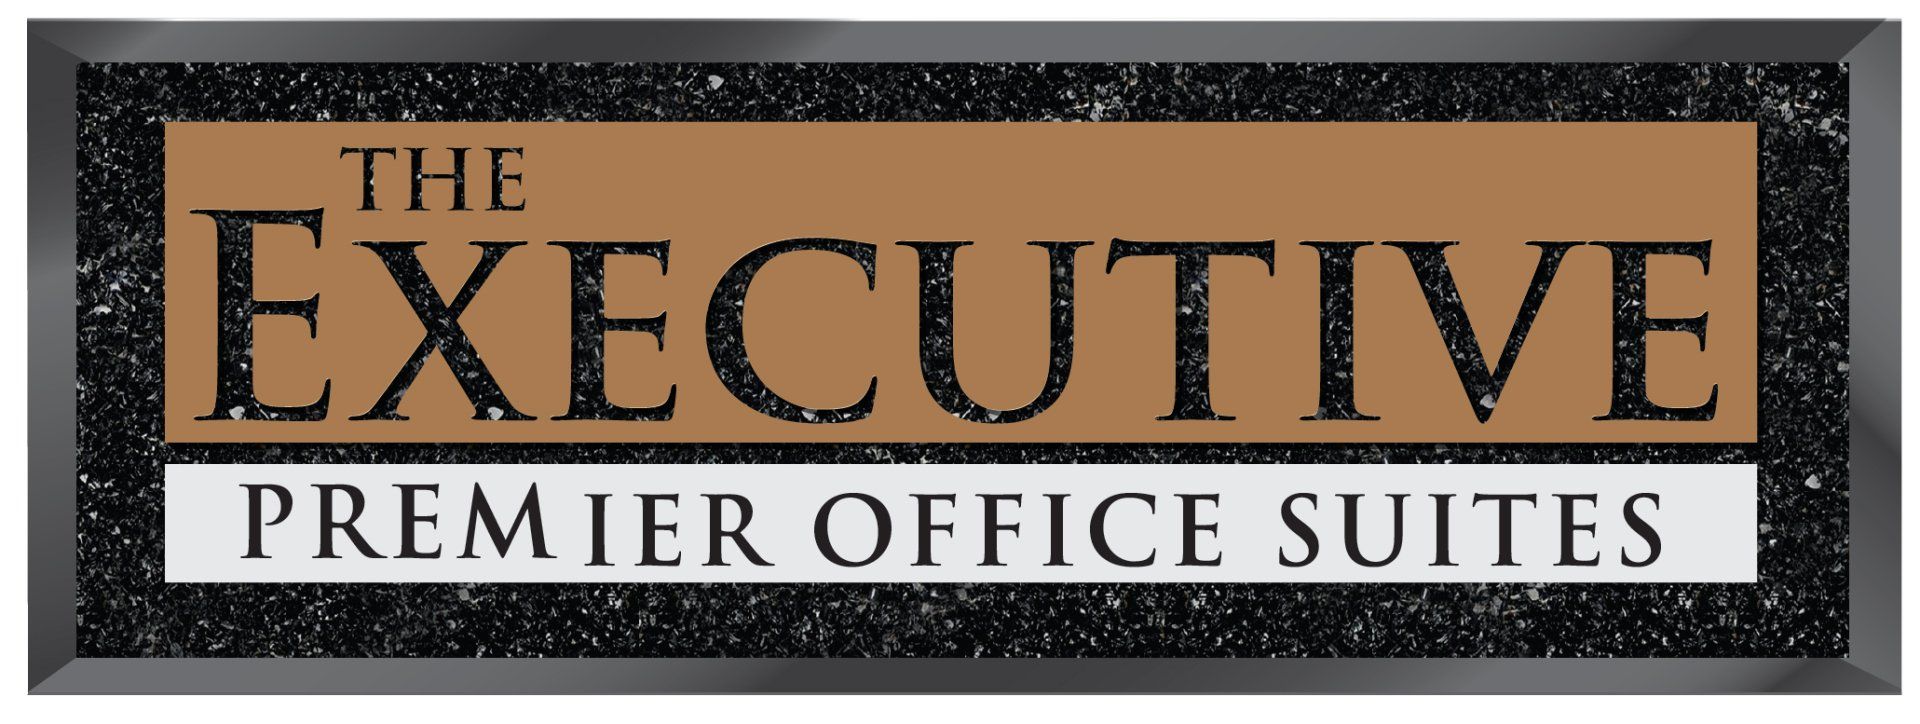 The Executive Premier  Office Suites - A Subsidiary Brand of Vision, LLC.